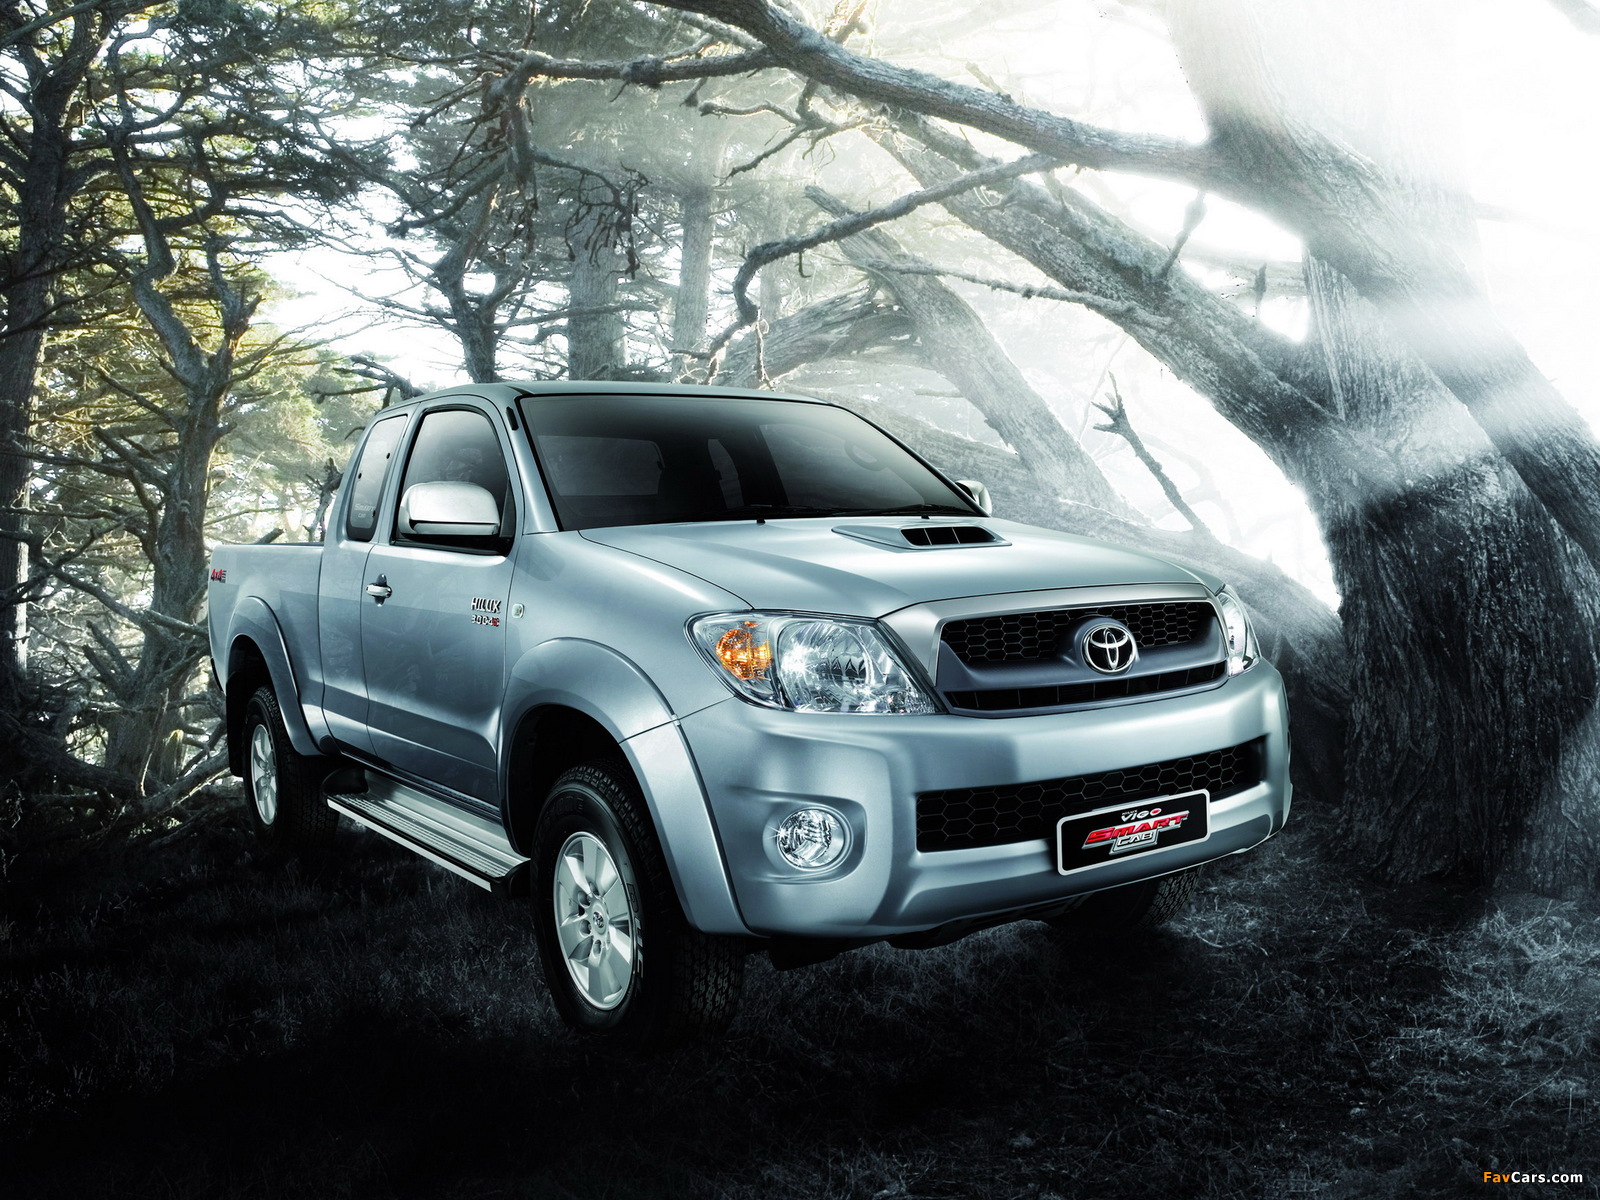 Toyota Hilux Extended Cab 200811 wallpapers 1600x1200